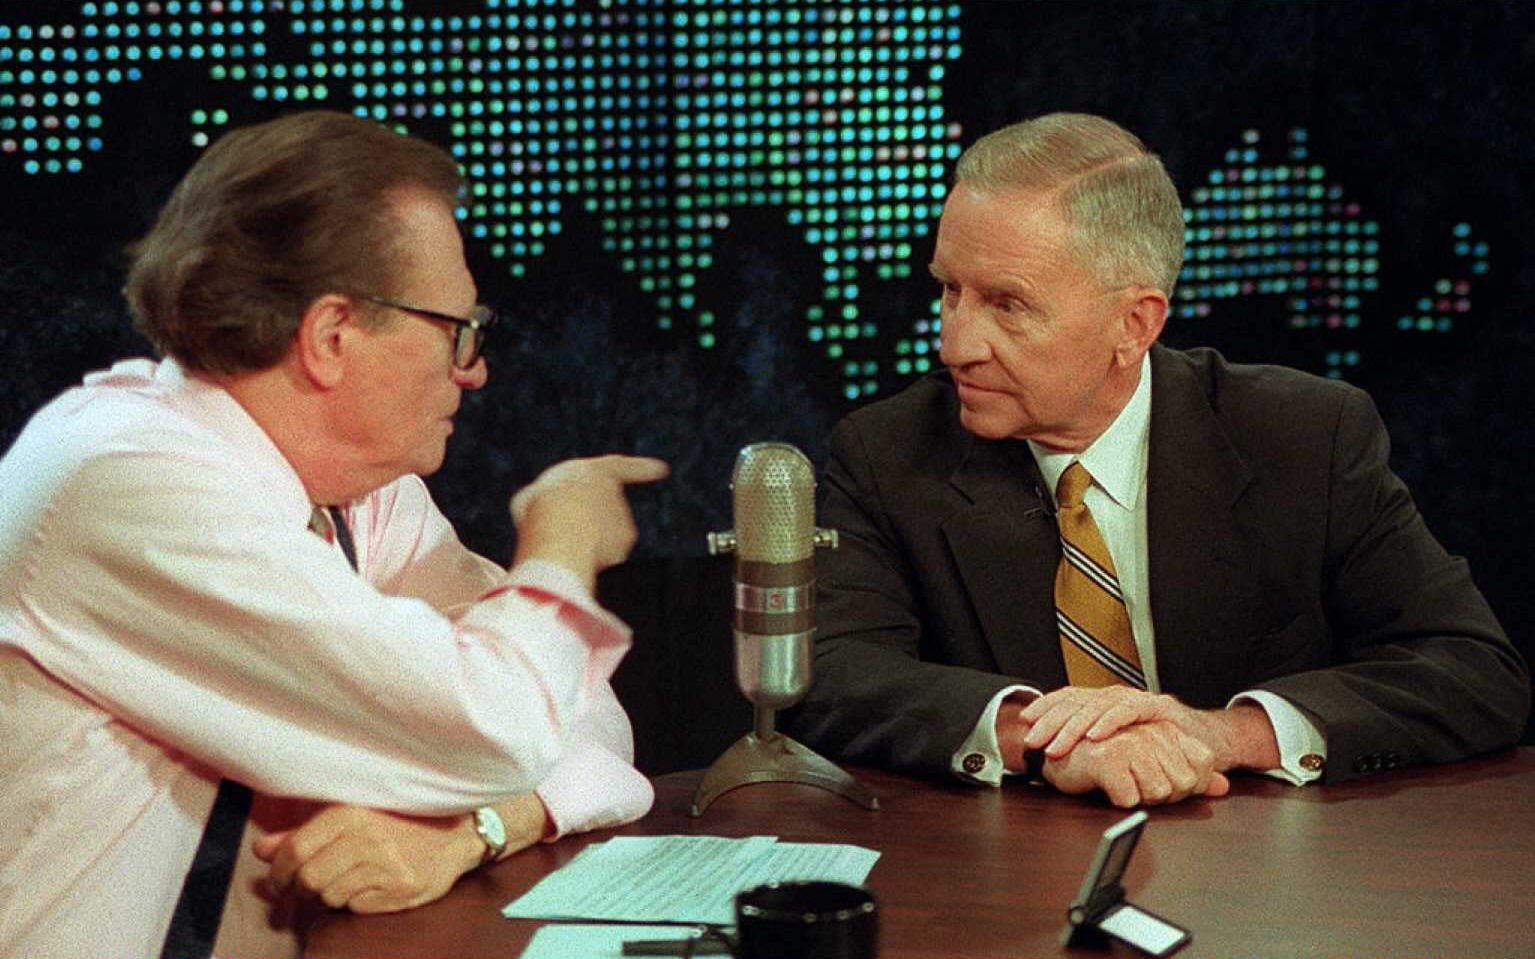 Larry King and Reform Party candidate Ross Perot